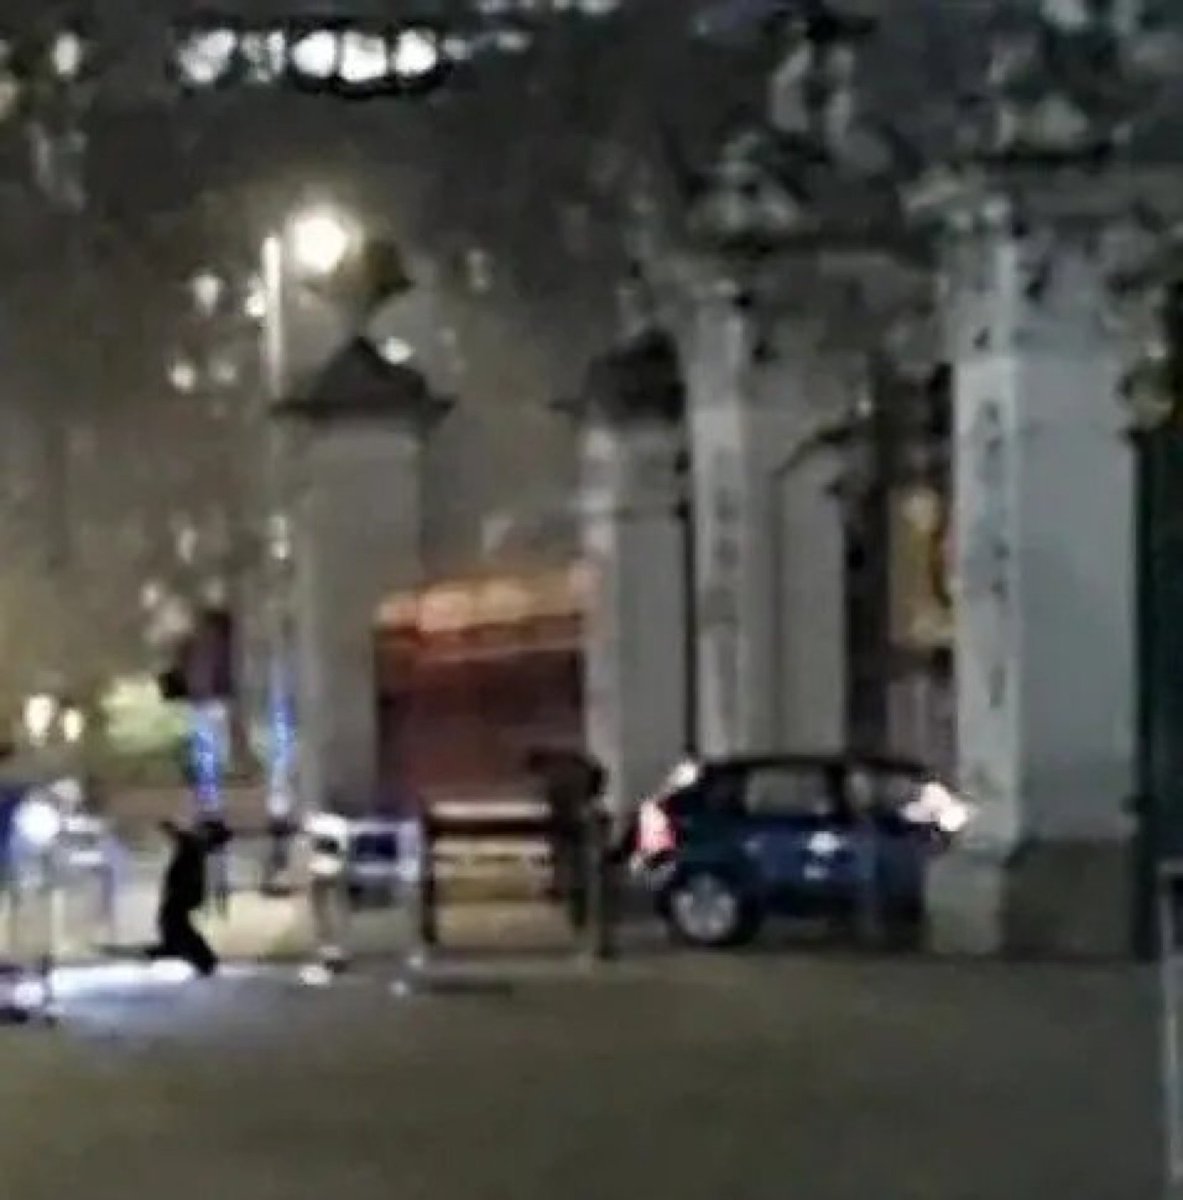 🚨🚨🚨A car rammed the Front Entrance of Buckingham Palace!!!!!! 🚨🚨🚨
#KingCharlesIII #QueenCamilla #PrincessofWales #Catherine #CatherineIsQueen #PrinceWilliam 

📢📢📢<Officers swooped after the vehicle rammed into the main entrance gates of the royal residence in…